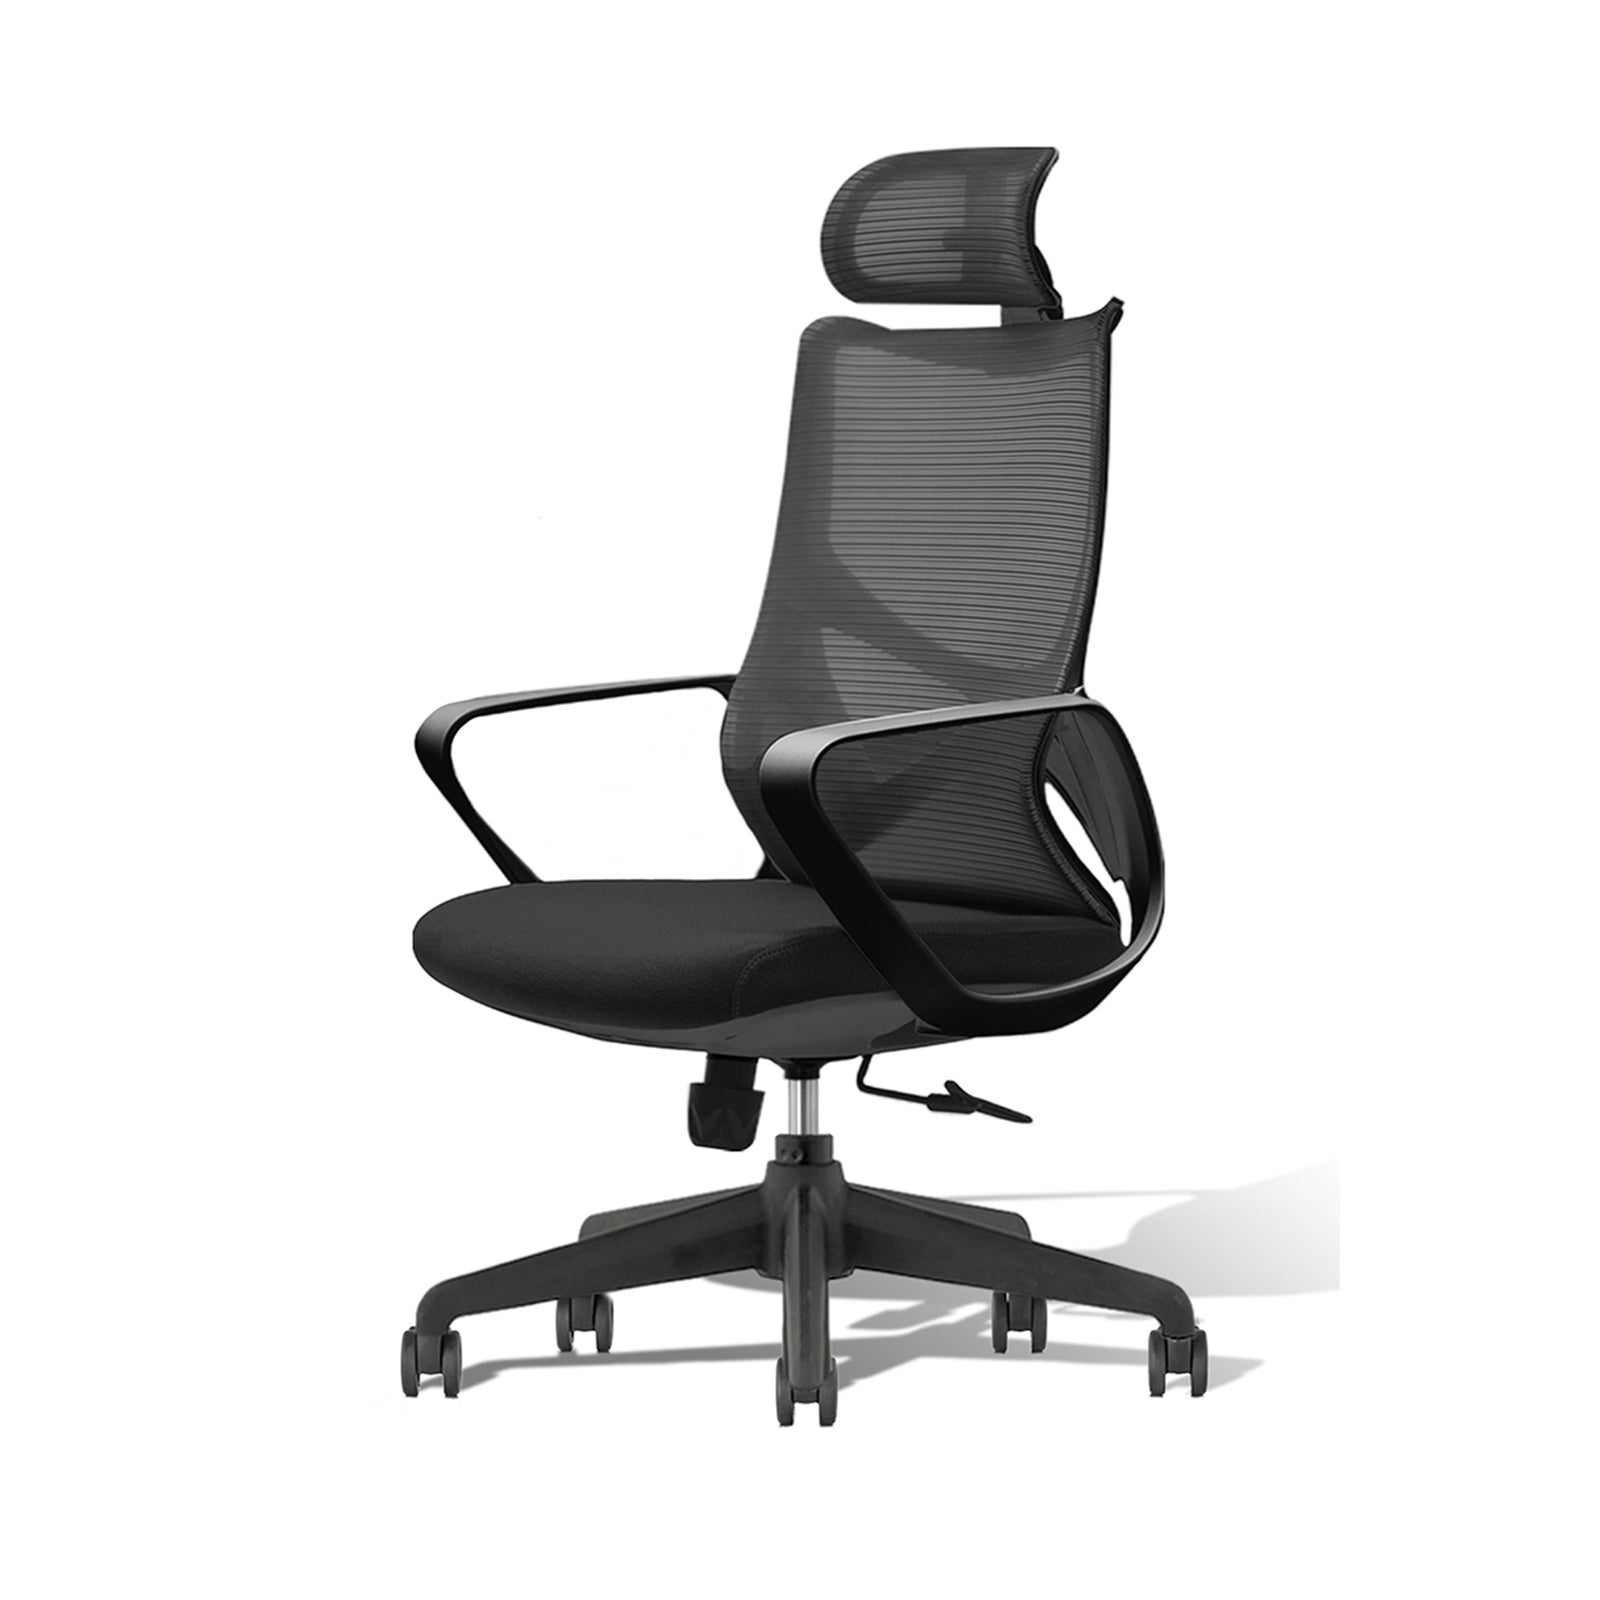 MIUZ COSMO Ergonomic Office Chair With Headrest Adjustable Computer Chair Breathable Mesh Grey Black